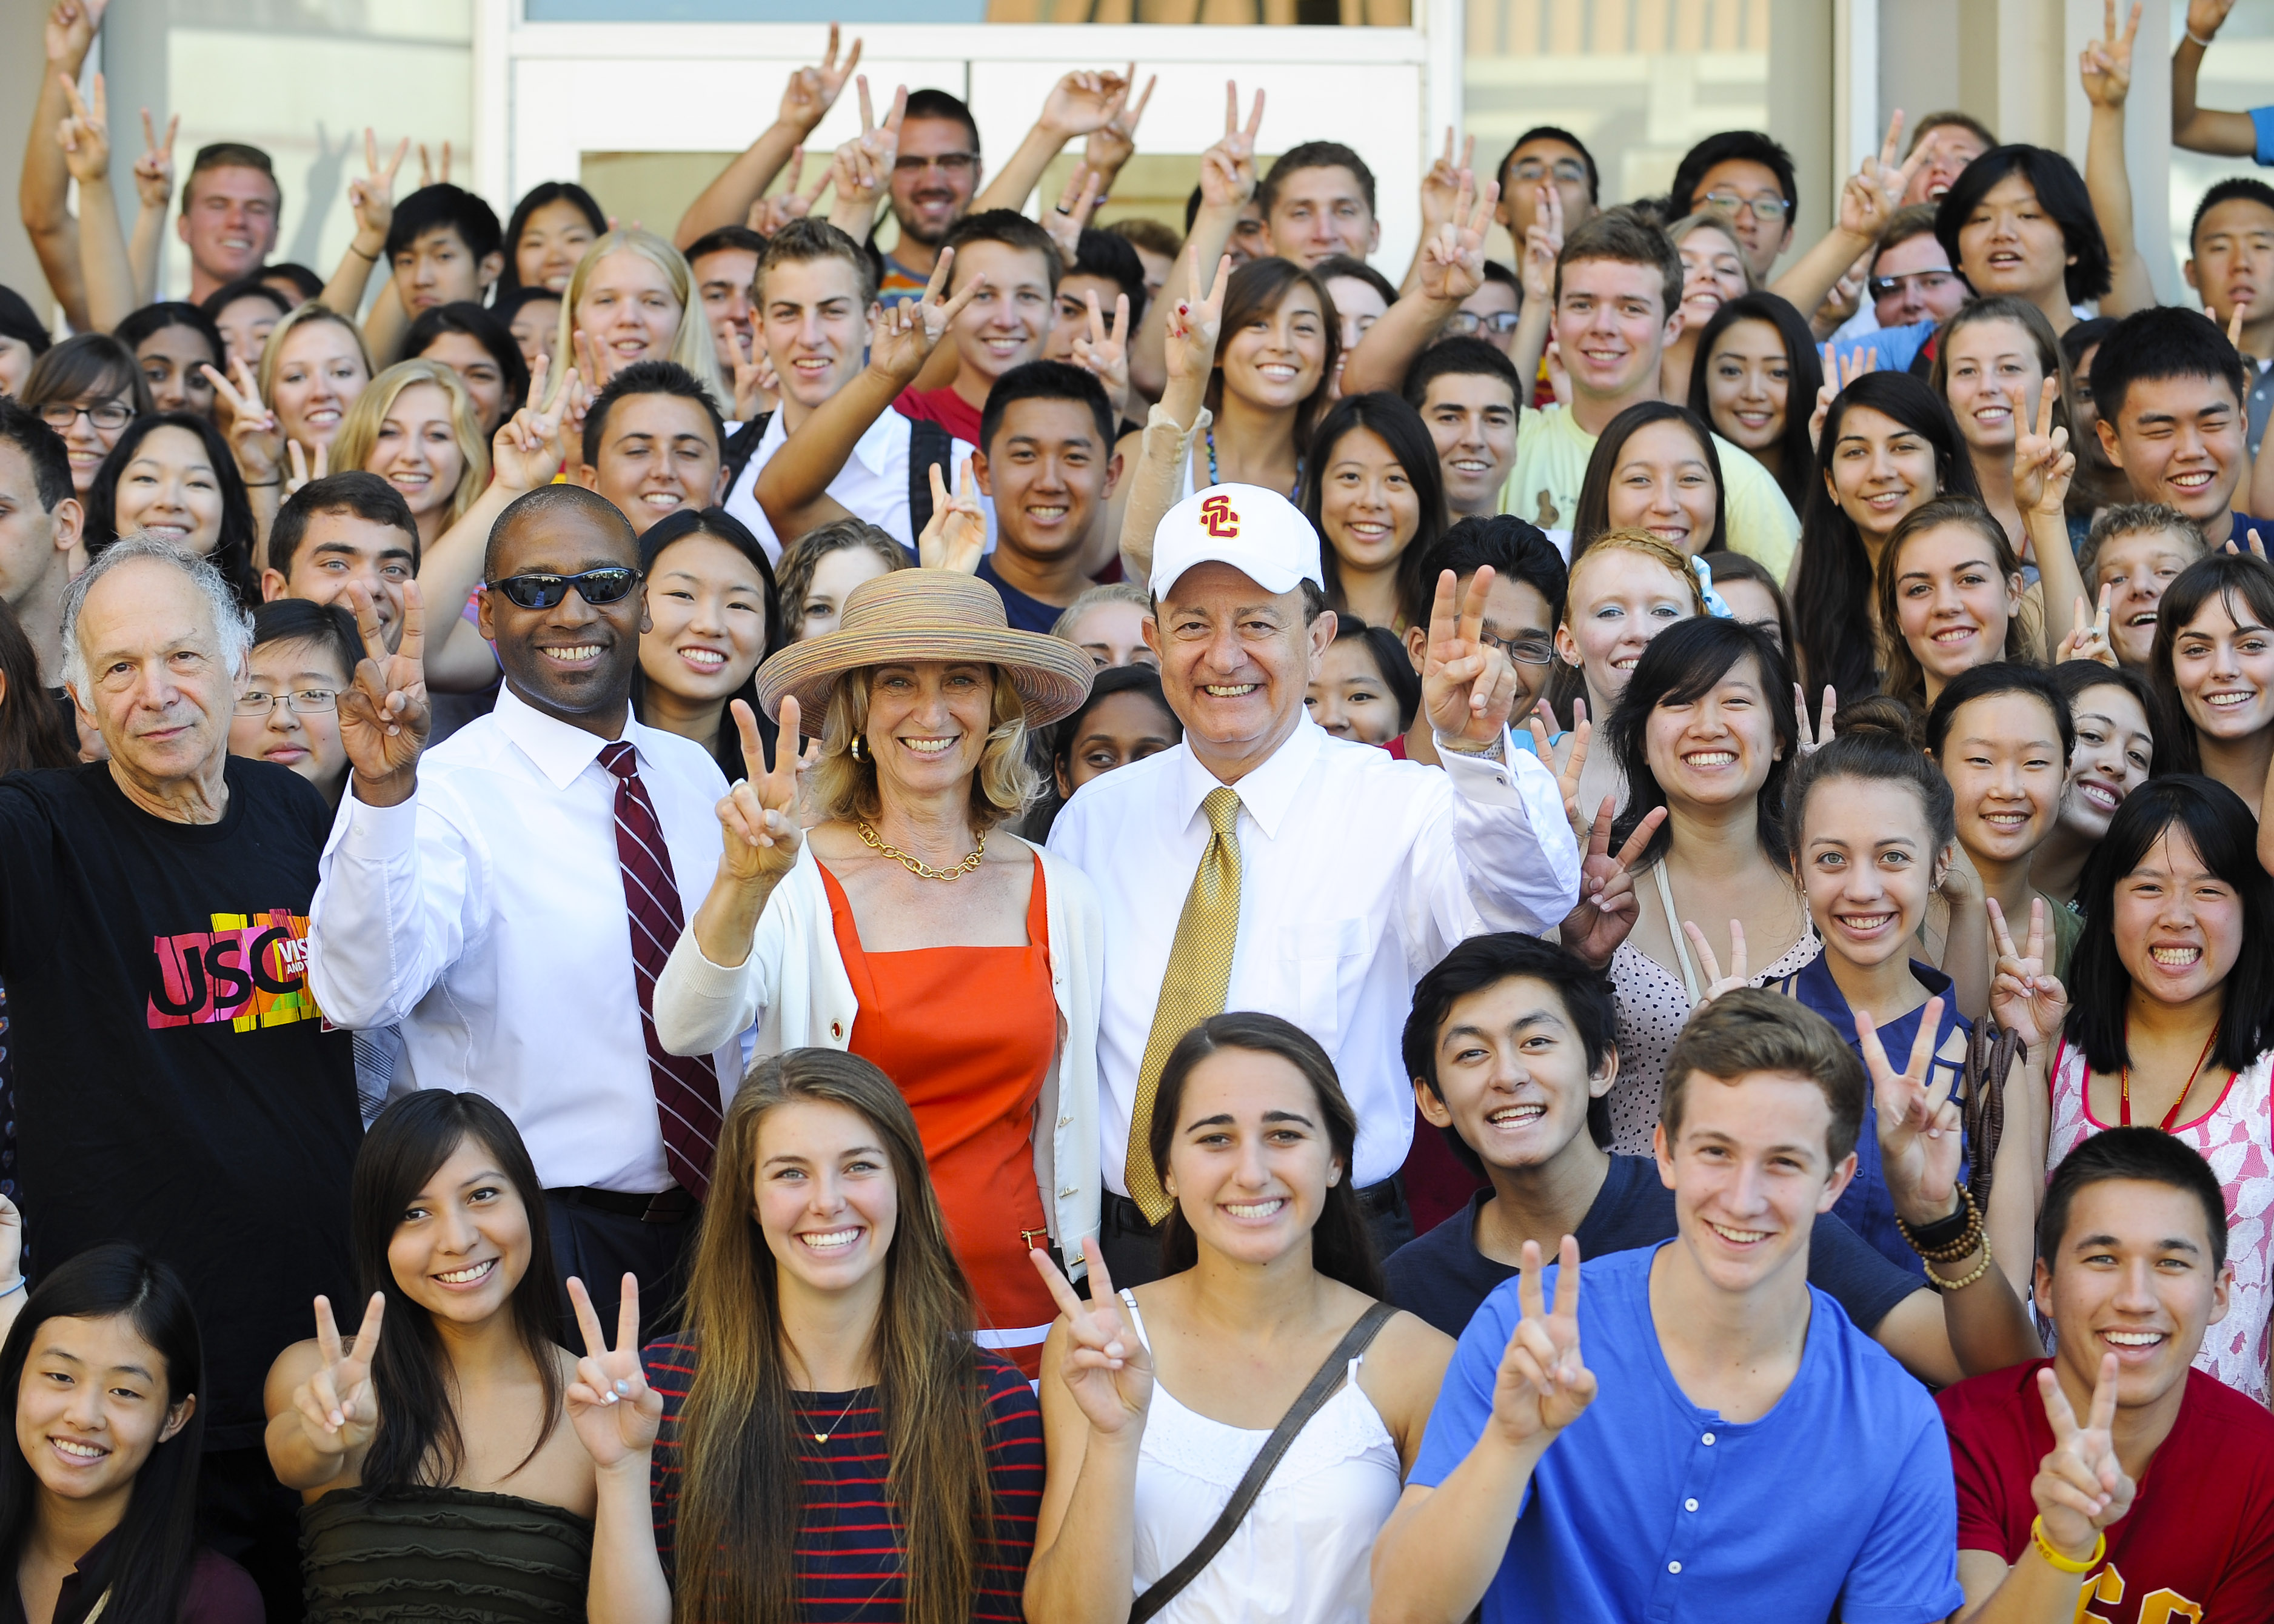 #ViterbiAdmit Open House is this Weekend – Last Opportunity to Visit Before May 1st